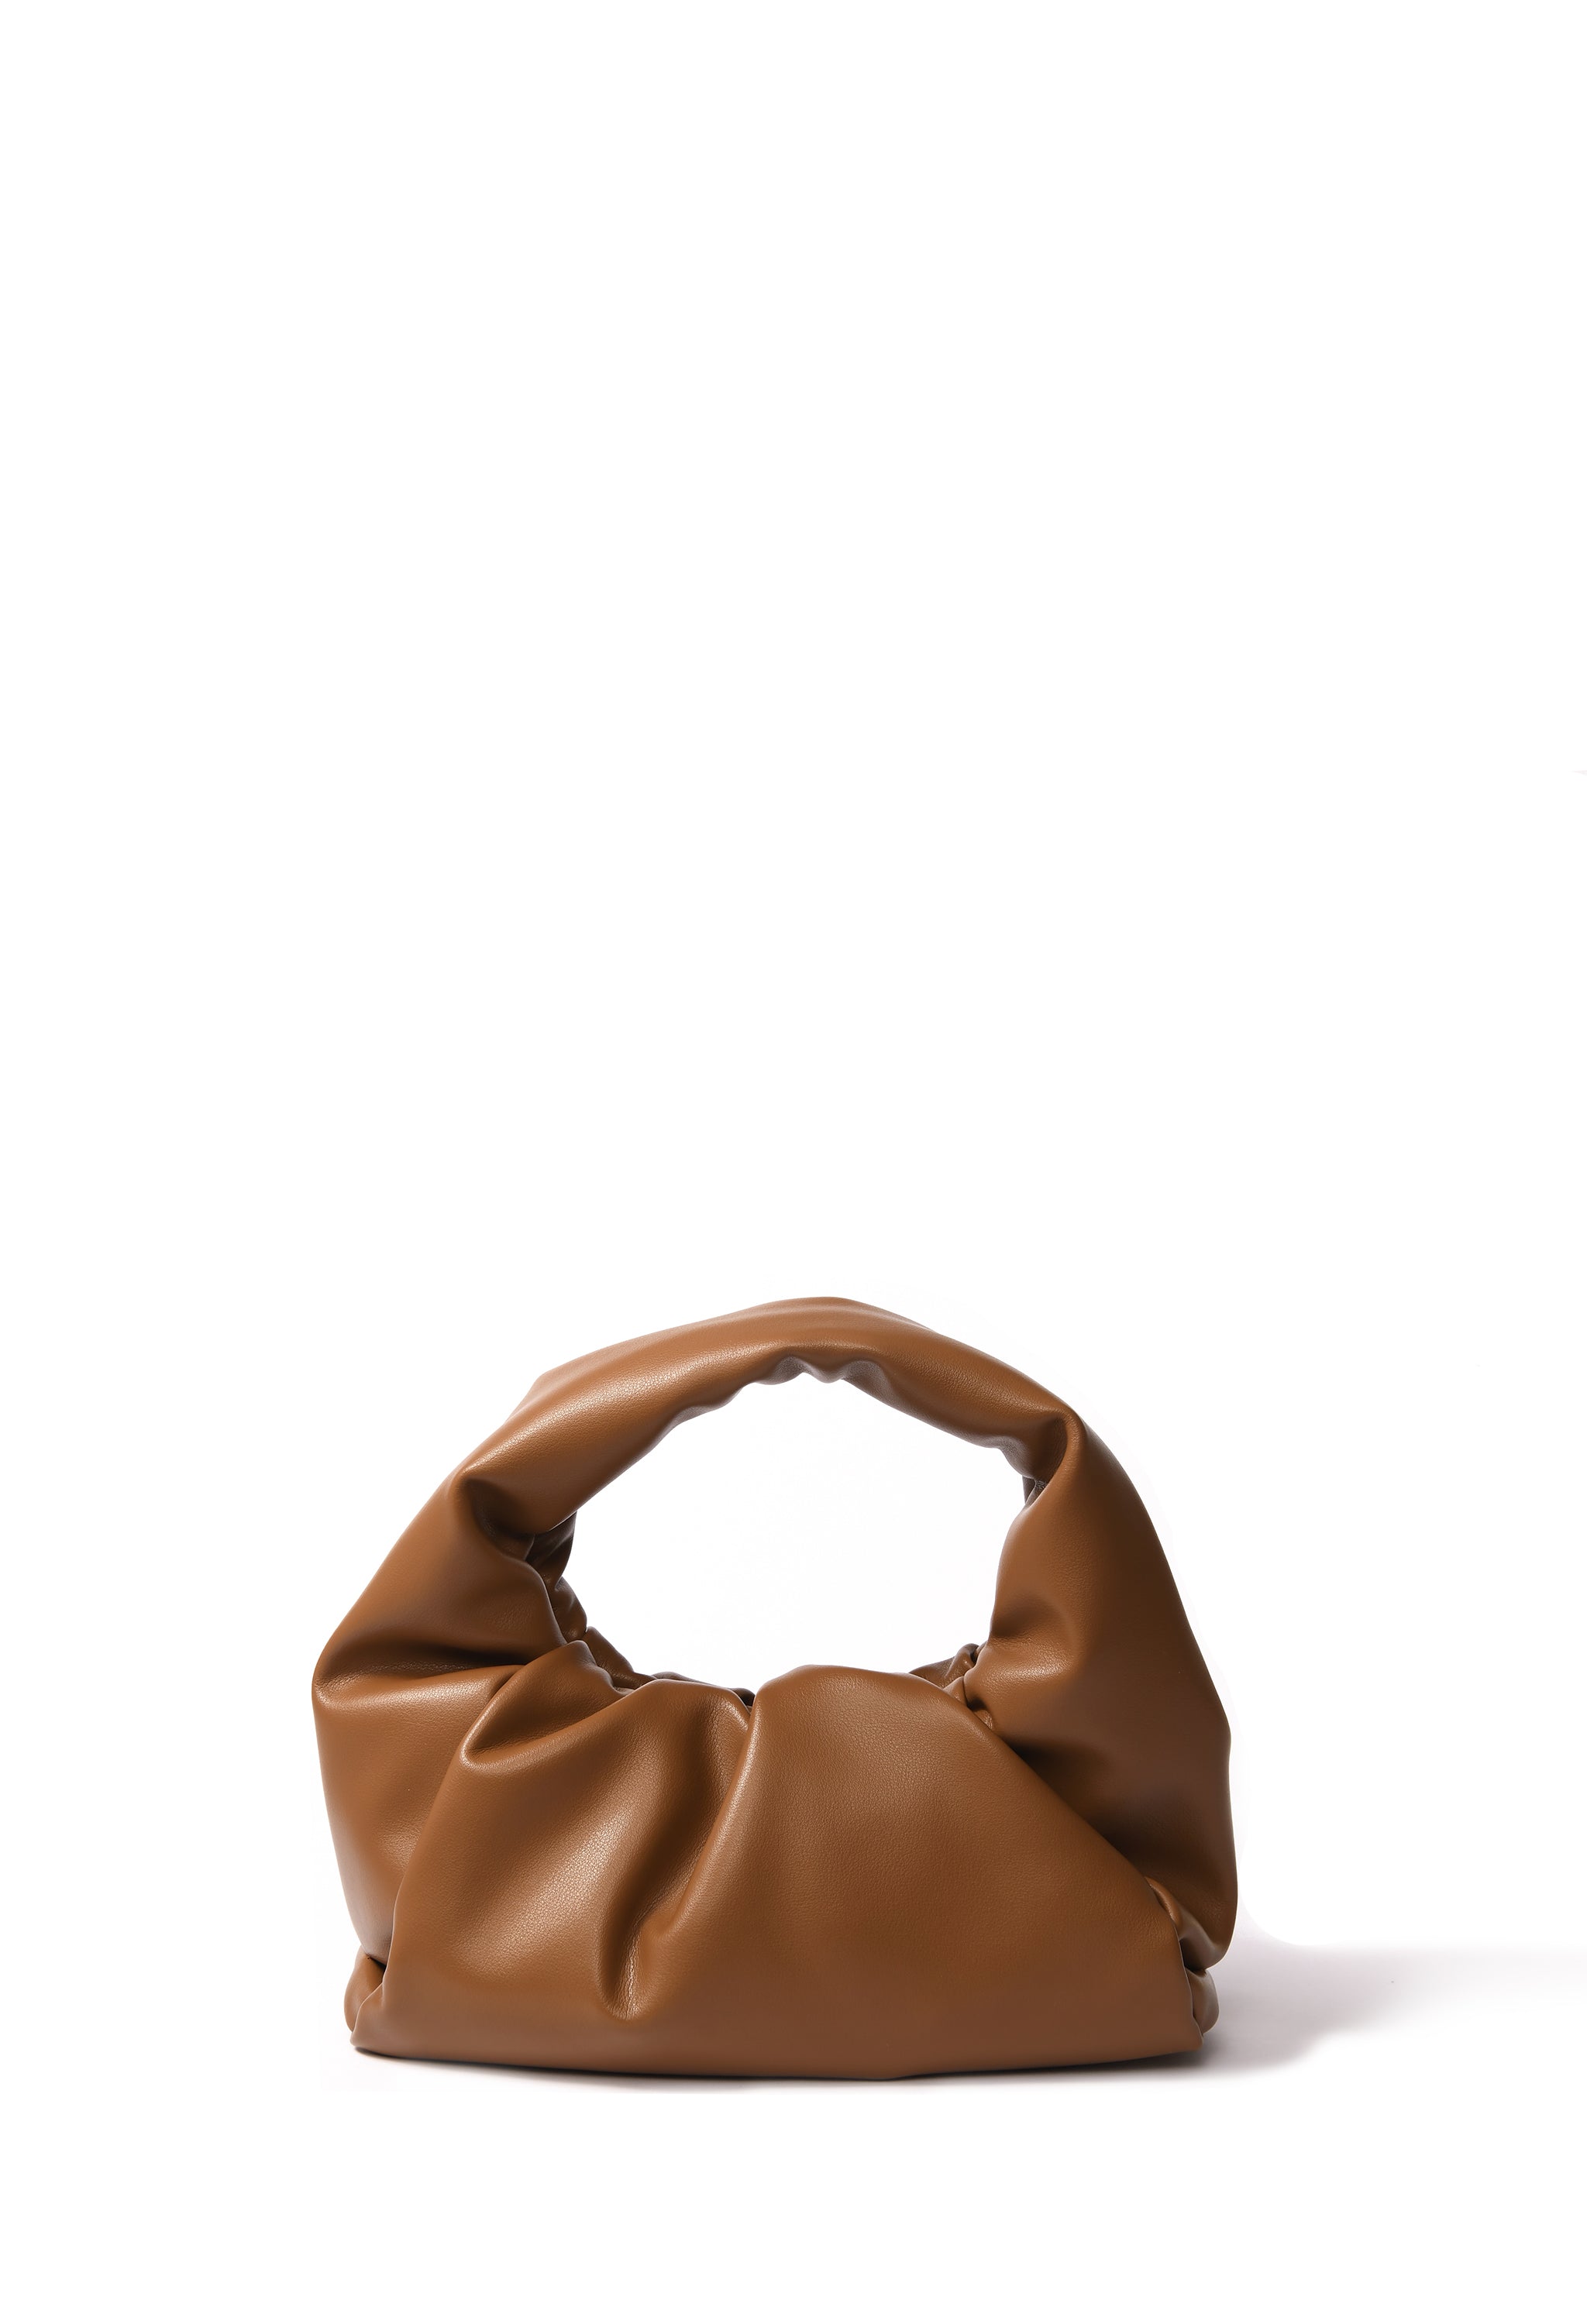 Marshmallow croissant bag in soft leather, Caramel